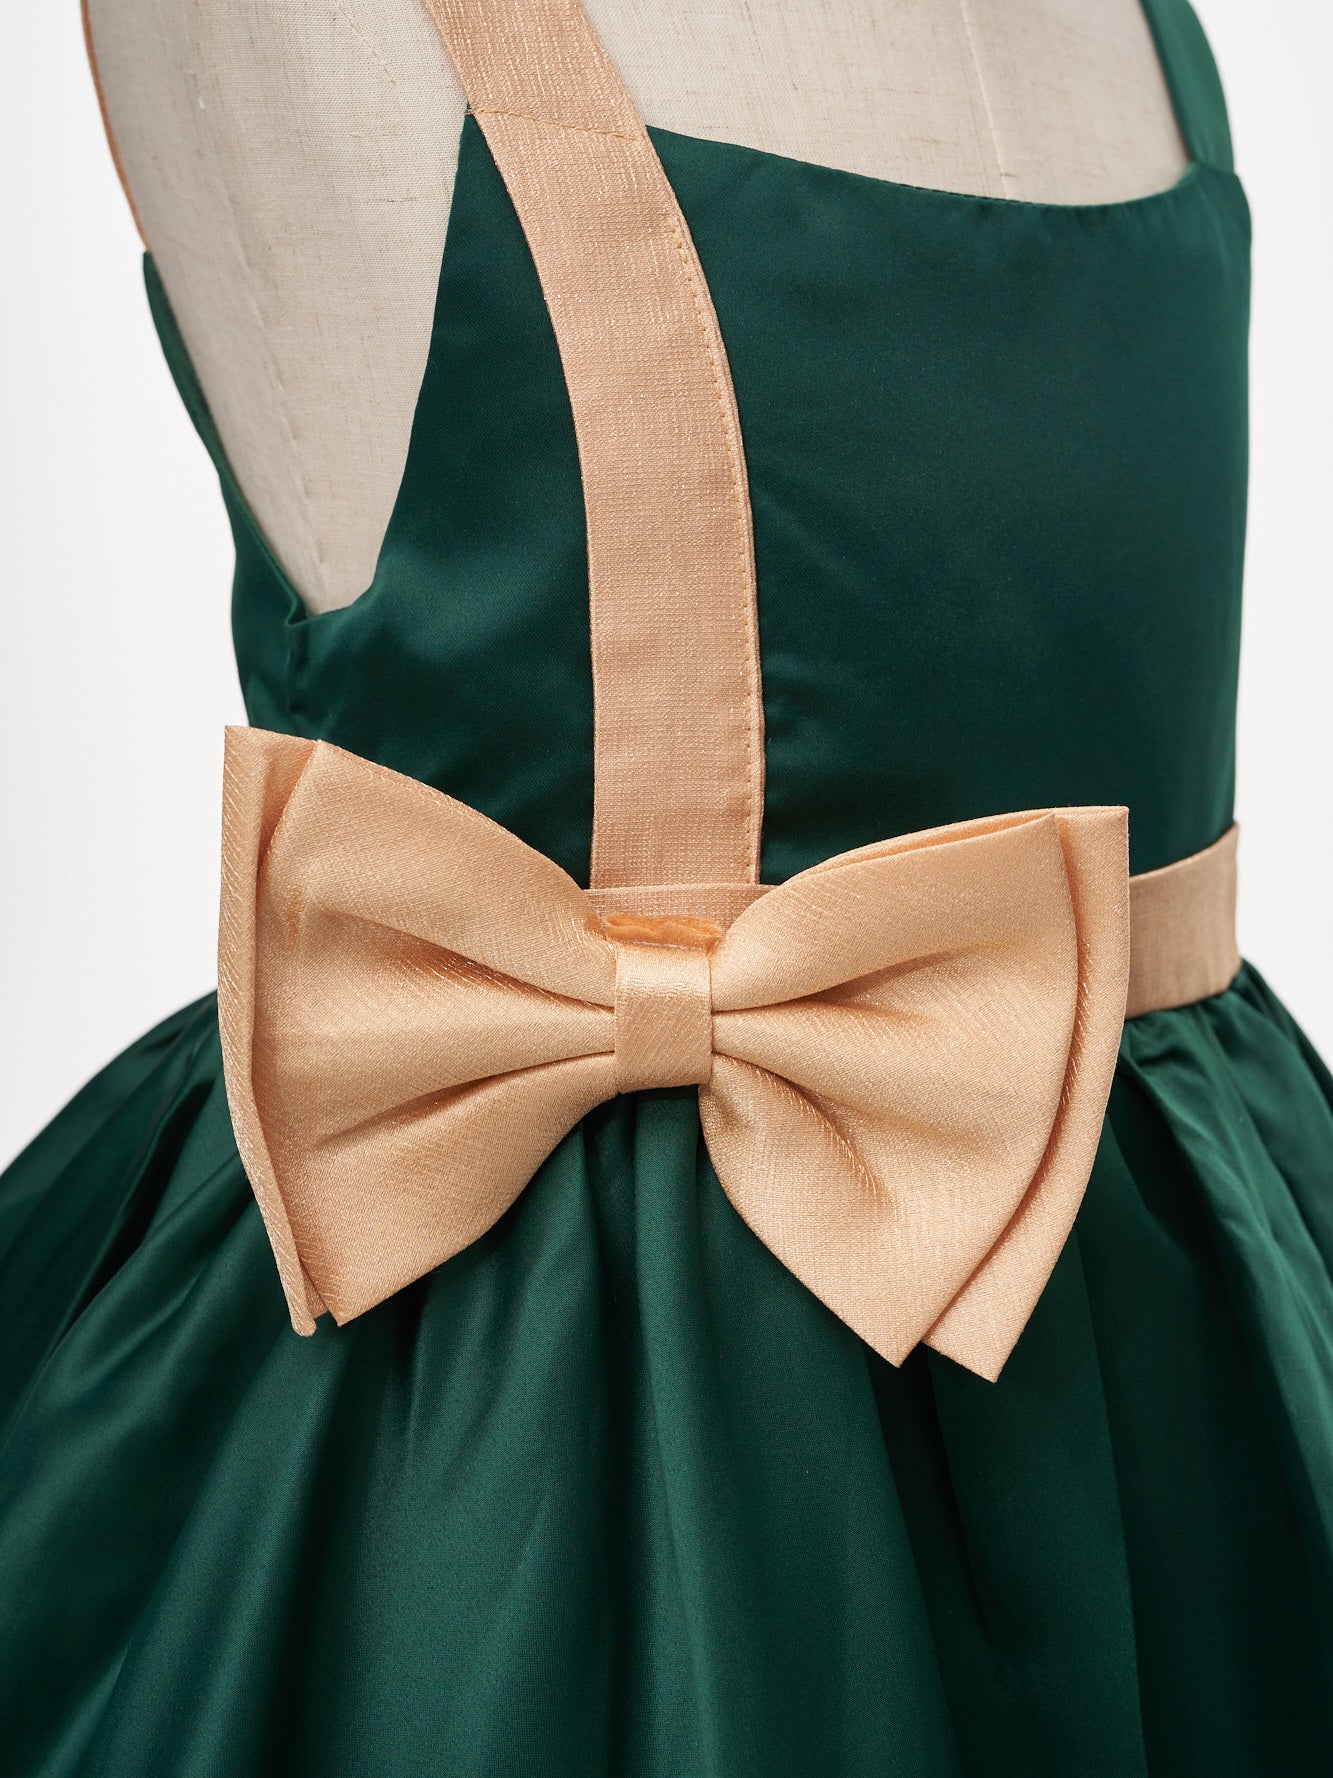 Kate Dark Green Bow Tie Tulle Princess Kids Dress for Photography